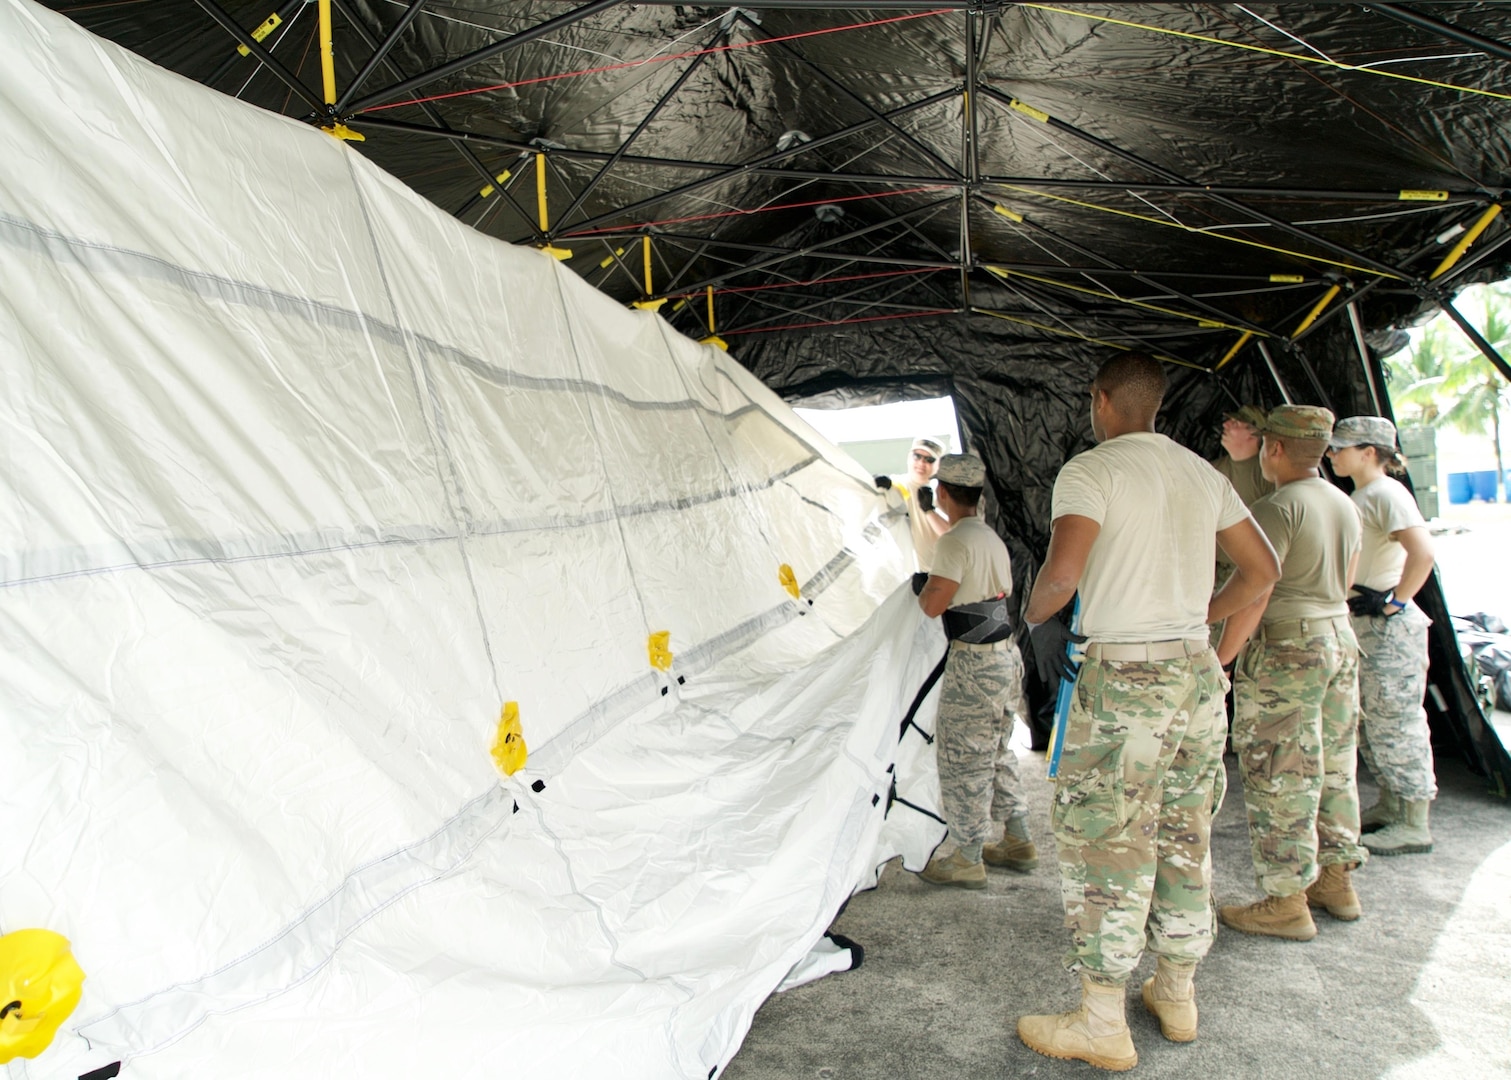 A joint team of U.S. Airmen and Soldiers attach an interior liner to a Base-X Shelter, Clark Air Base, Philippines, Jan. 15, 2017. The shelter will house an Eagle Vision Data Integration Segment. Eagle Vision is a ground-based commercial satellite imagery system. While in the Philippines, the team of U.S. service members will exchange ideas and experiences with their Philippine allies on how the Eagle Vision system can enhance Humanitarian Assistance and Disaster Relief capabilities.(U.S. Air Force photo by Tech. Sgt. James Stewart/Released)